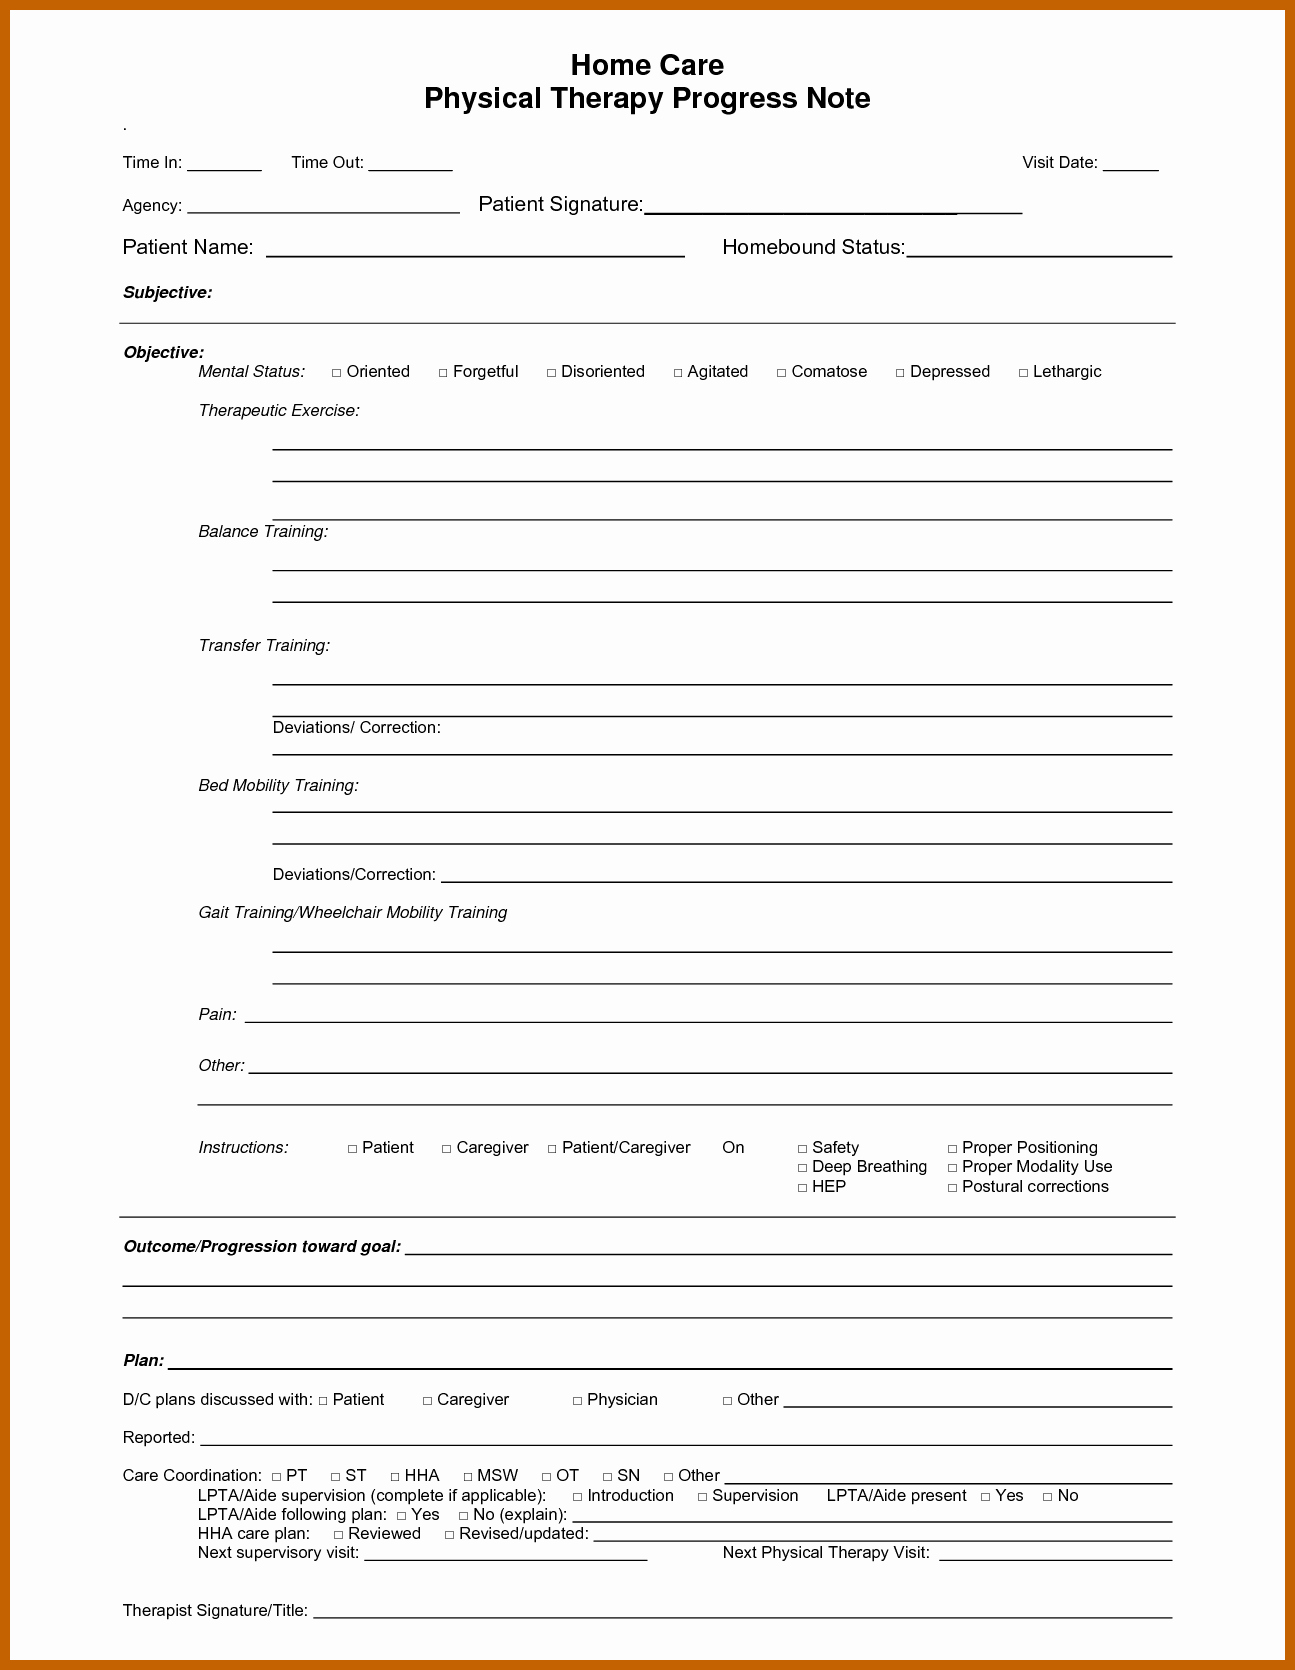 Physical therapy Daily Notes Template Fresh 10 11 therapy Note Templates